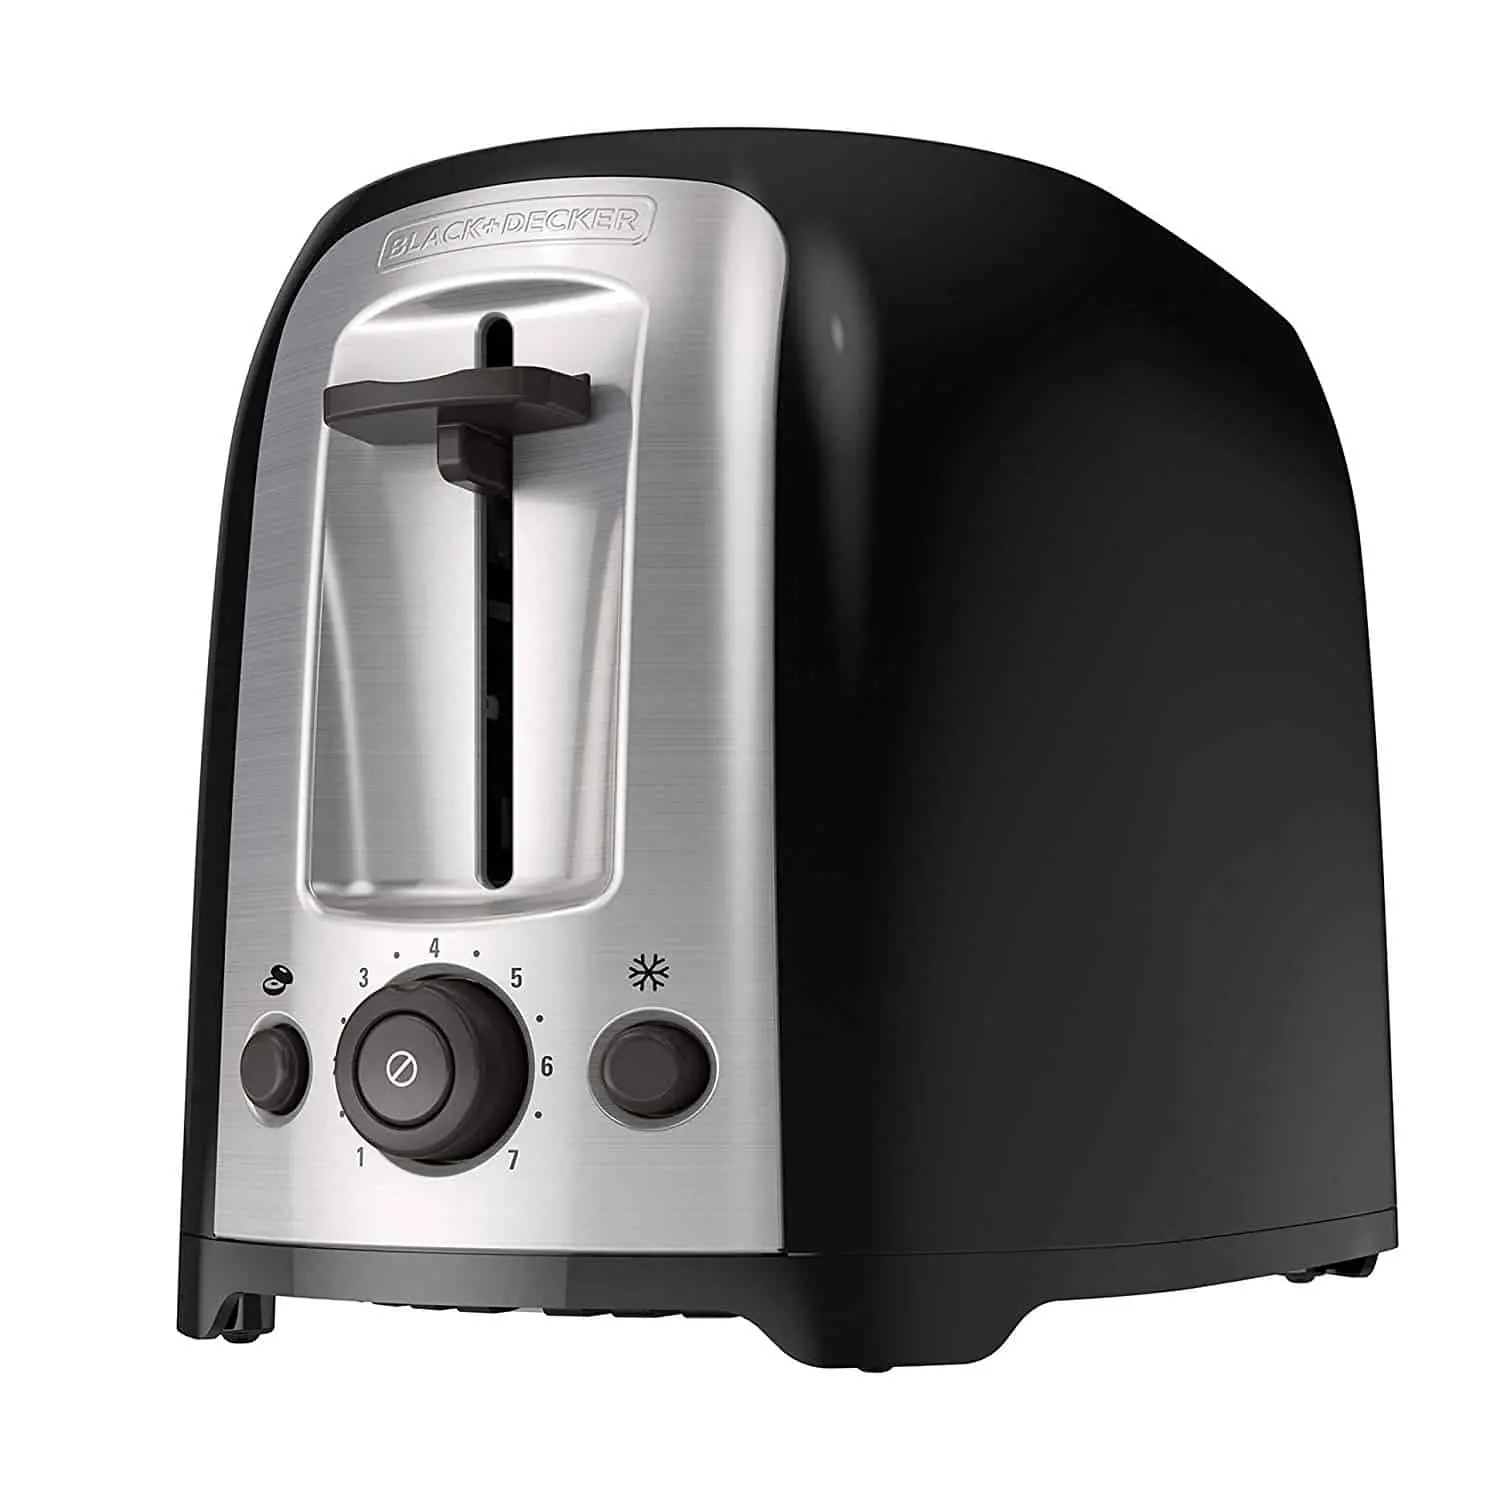 BLACK+DECKER 2-Slice Extra Wide Slot Toaster, Classic Oval, Black with Stainless Steel Accents, 